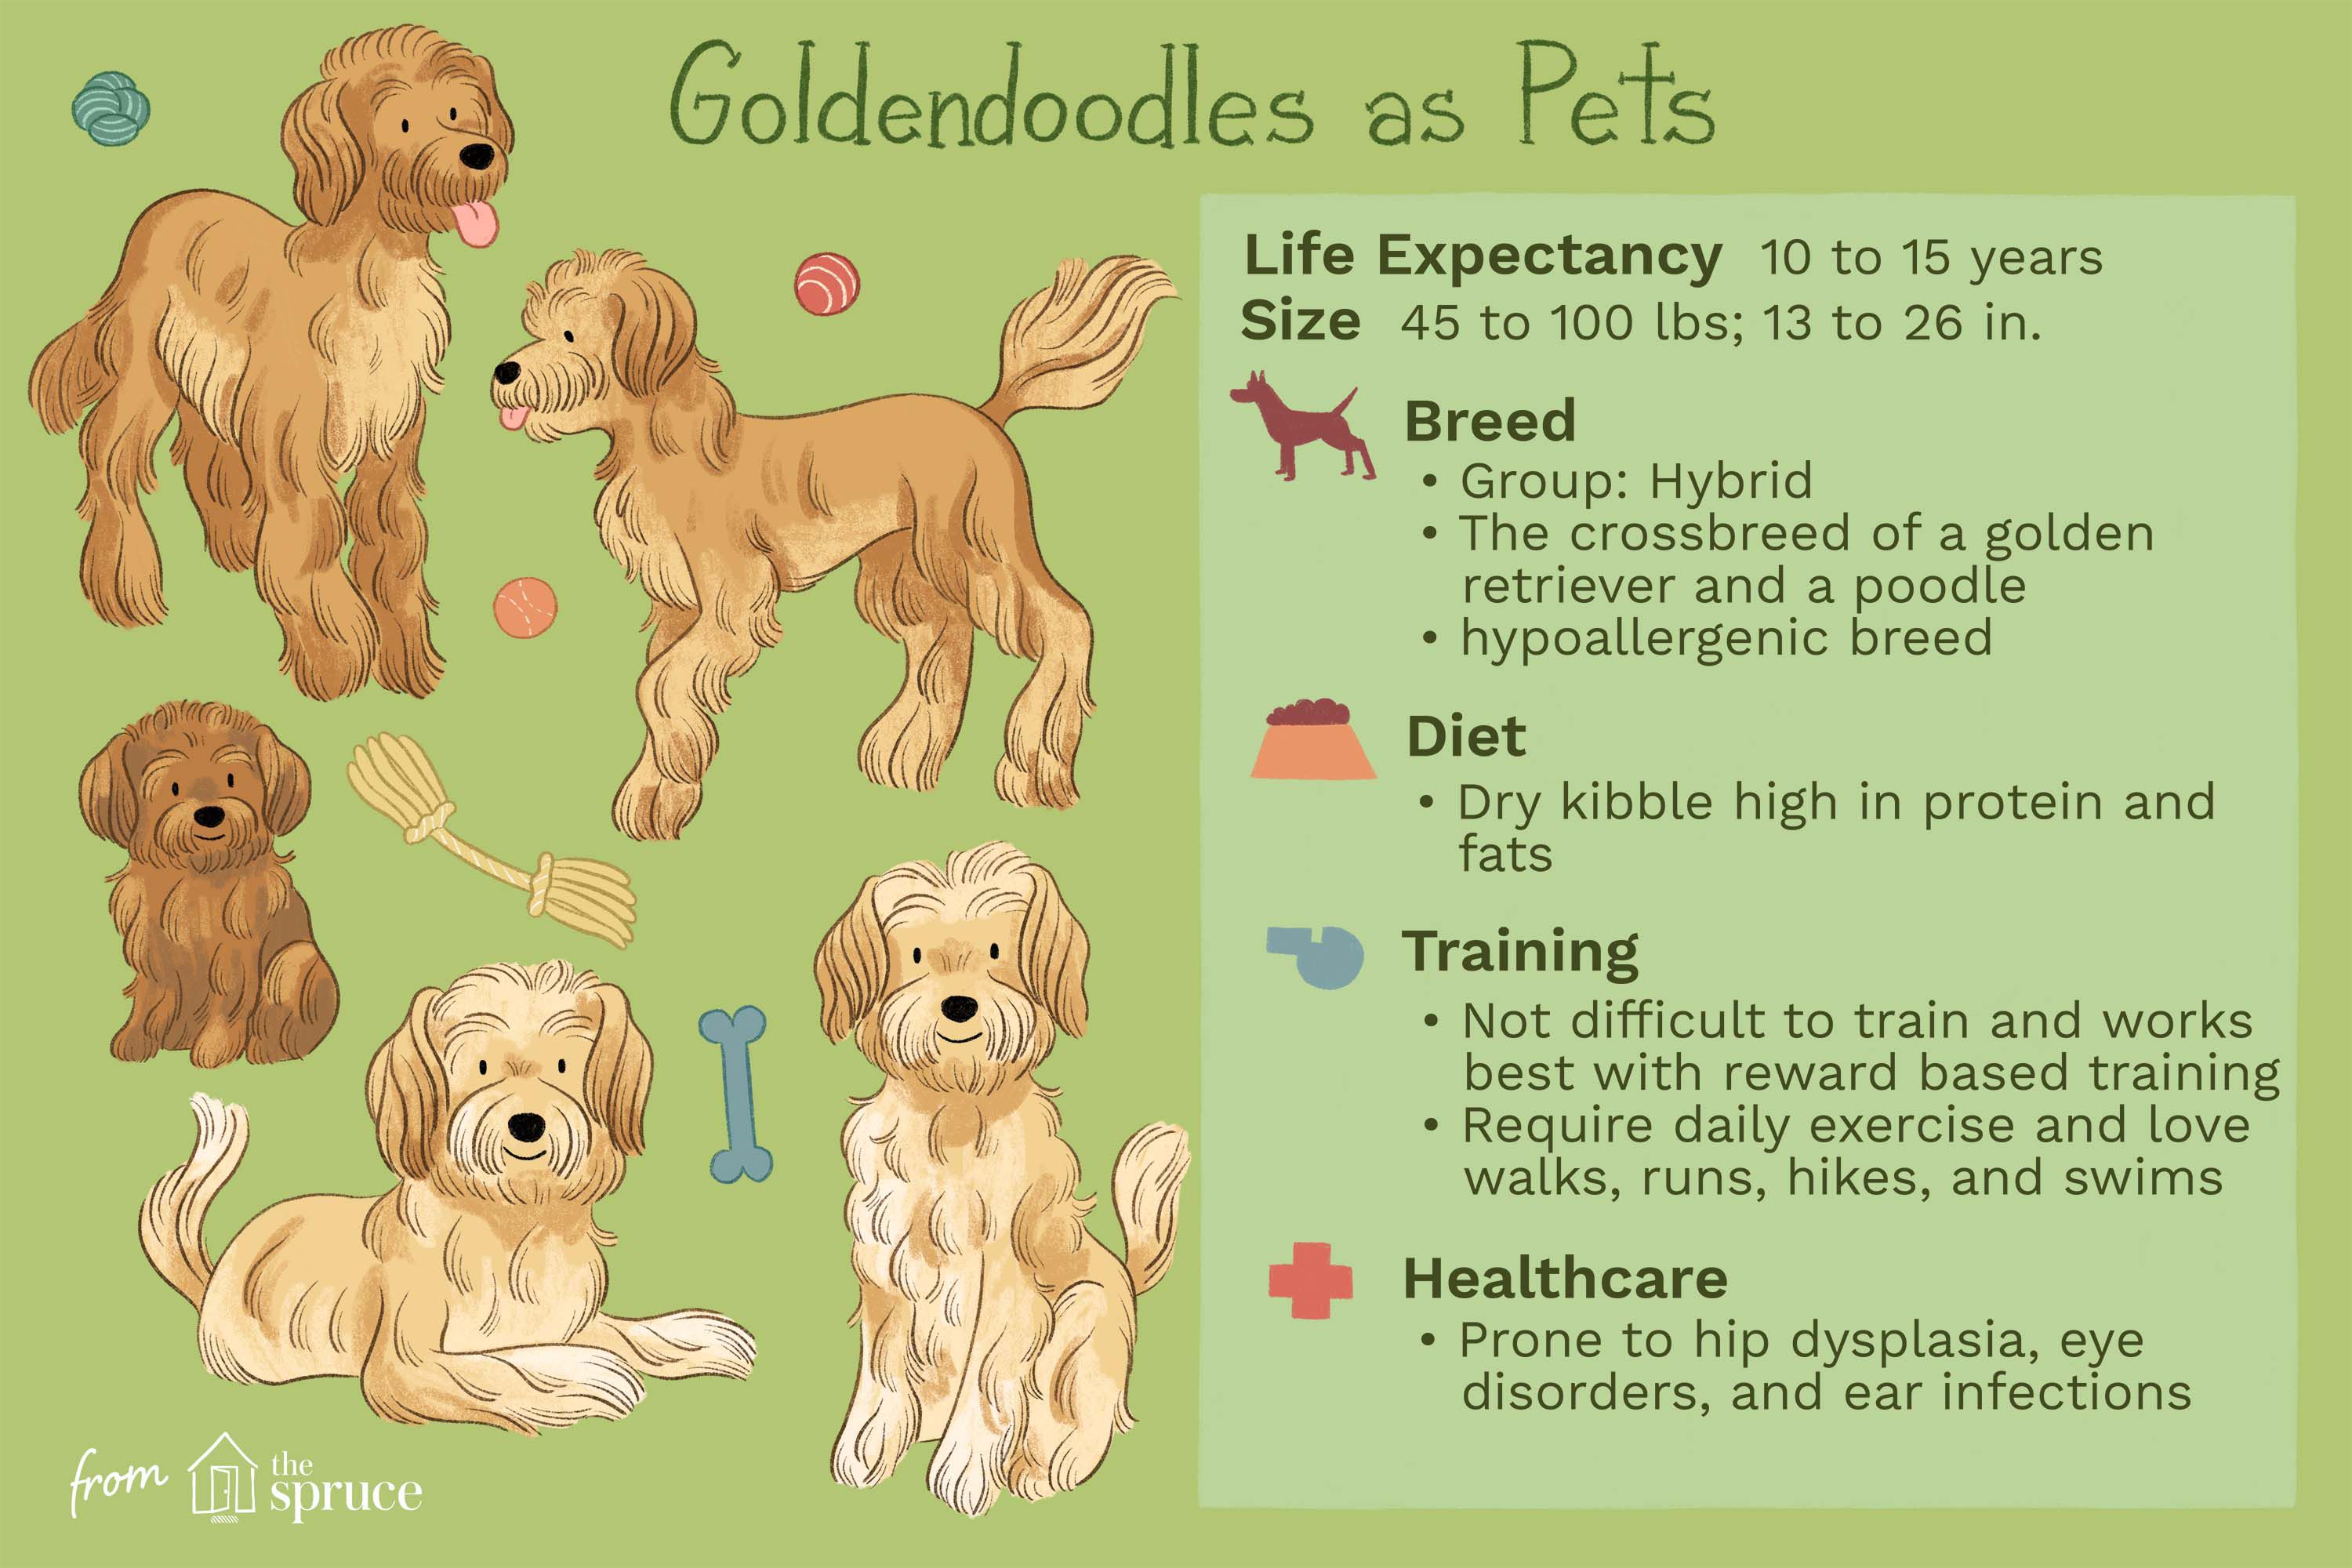 Are Goldendoodles Healthy?